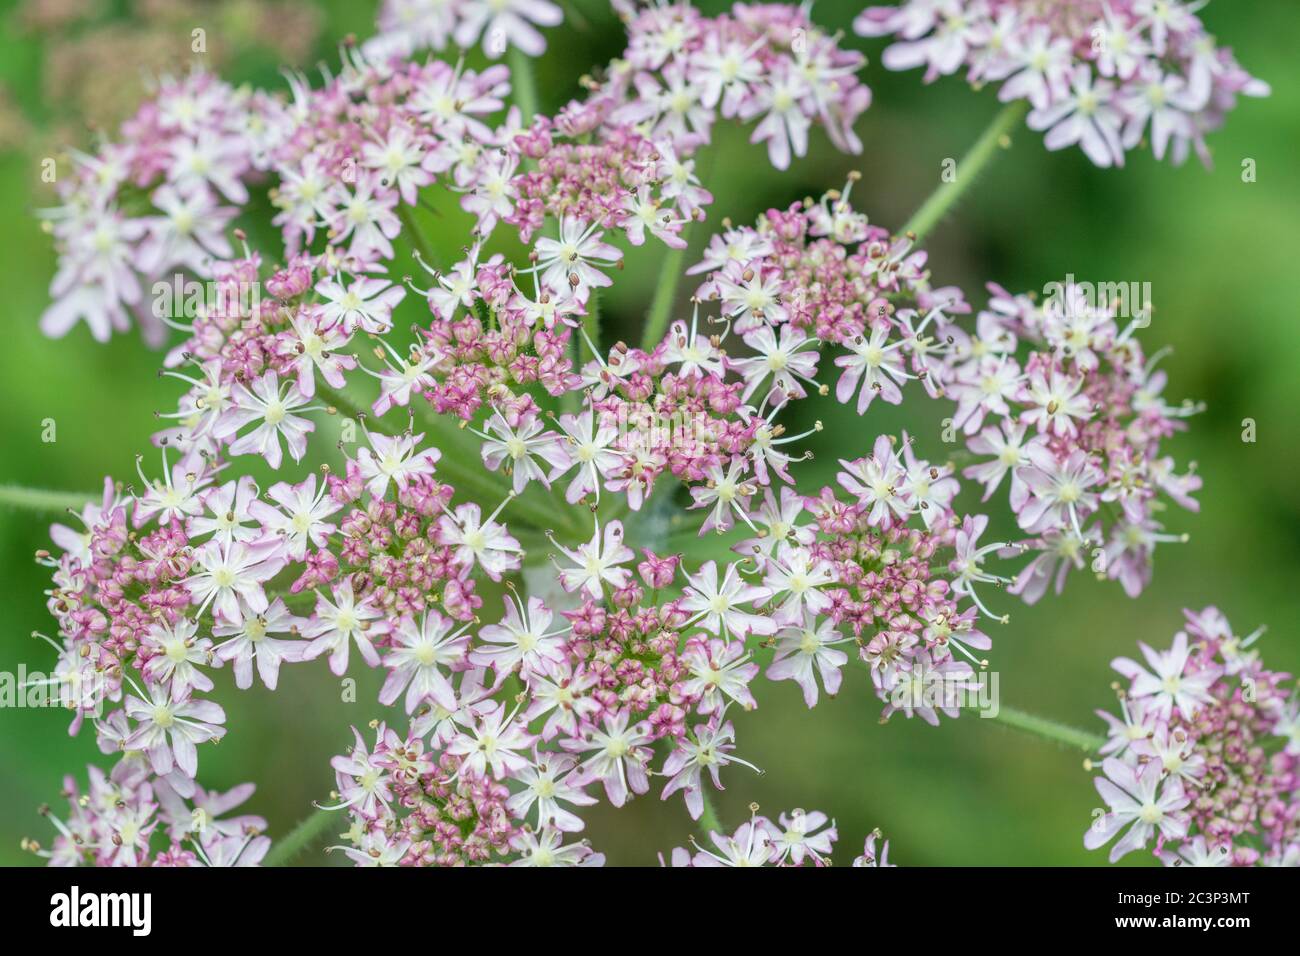 Flowers and flower buds of Hogweed / Cow Parsnip - Heracleum sphondylium. Good example of Umbellifer flower cluster shape. The sap blisters skin. Stock Photo